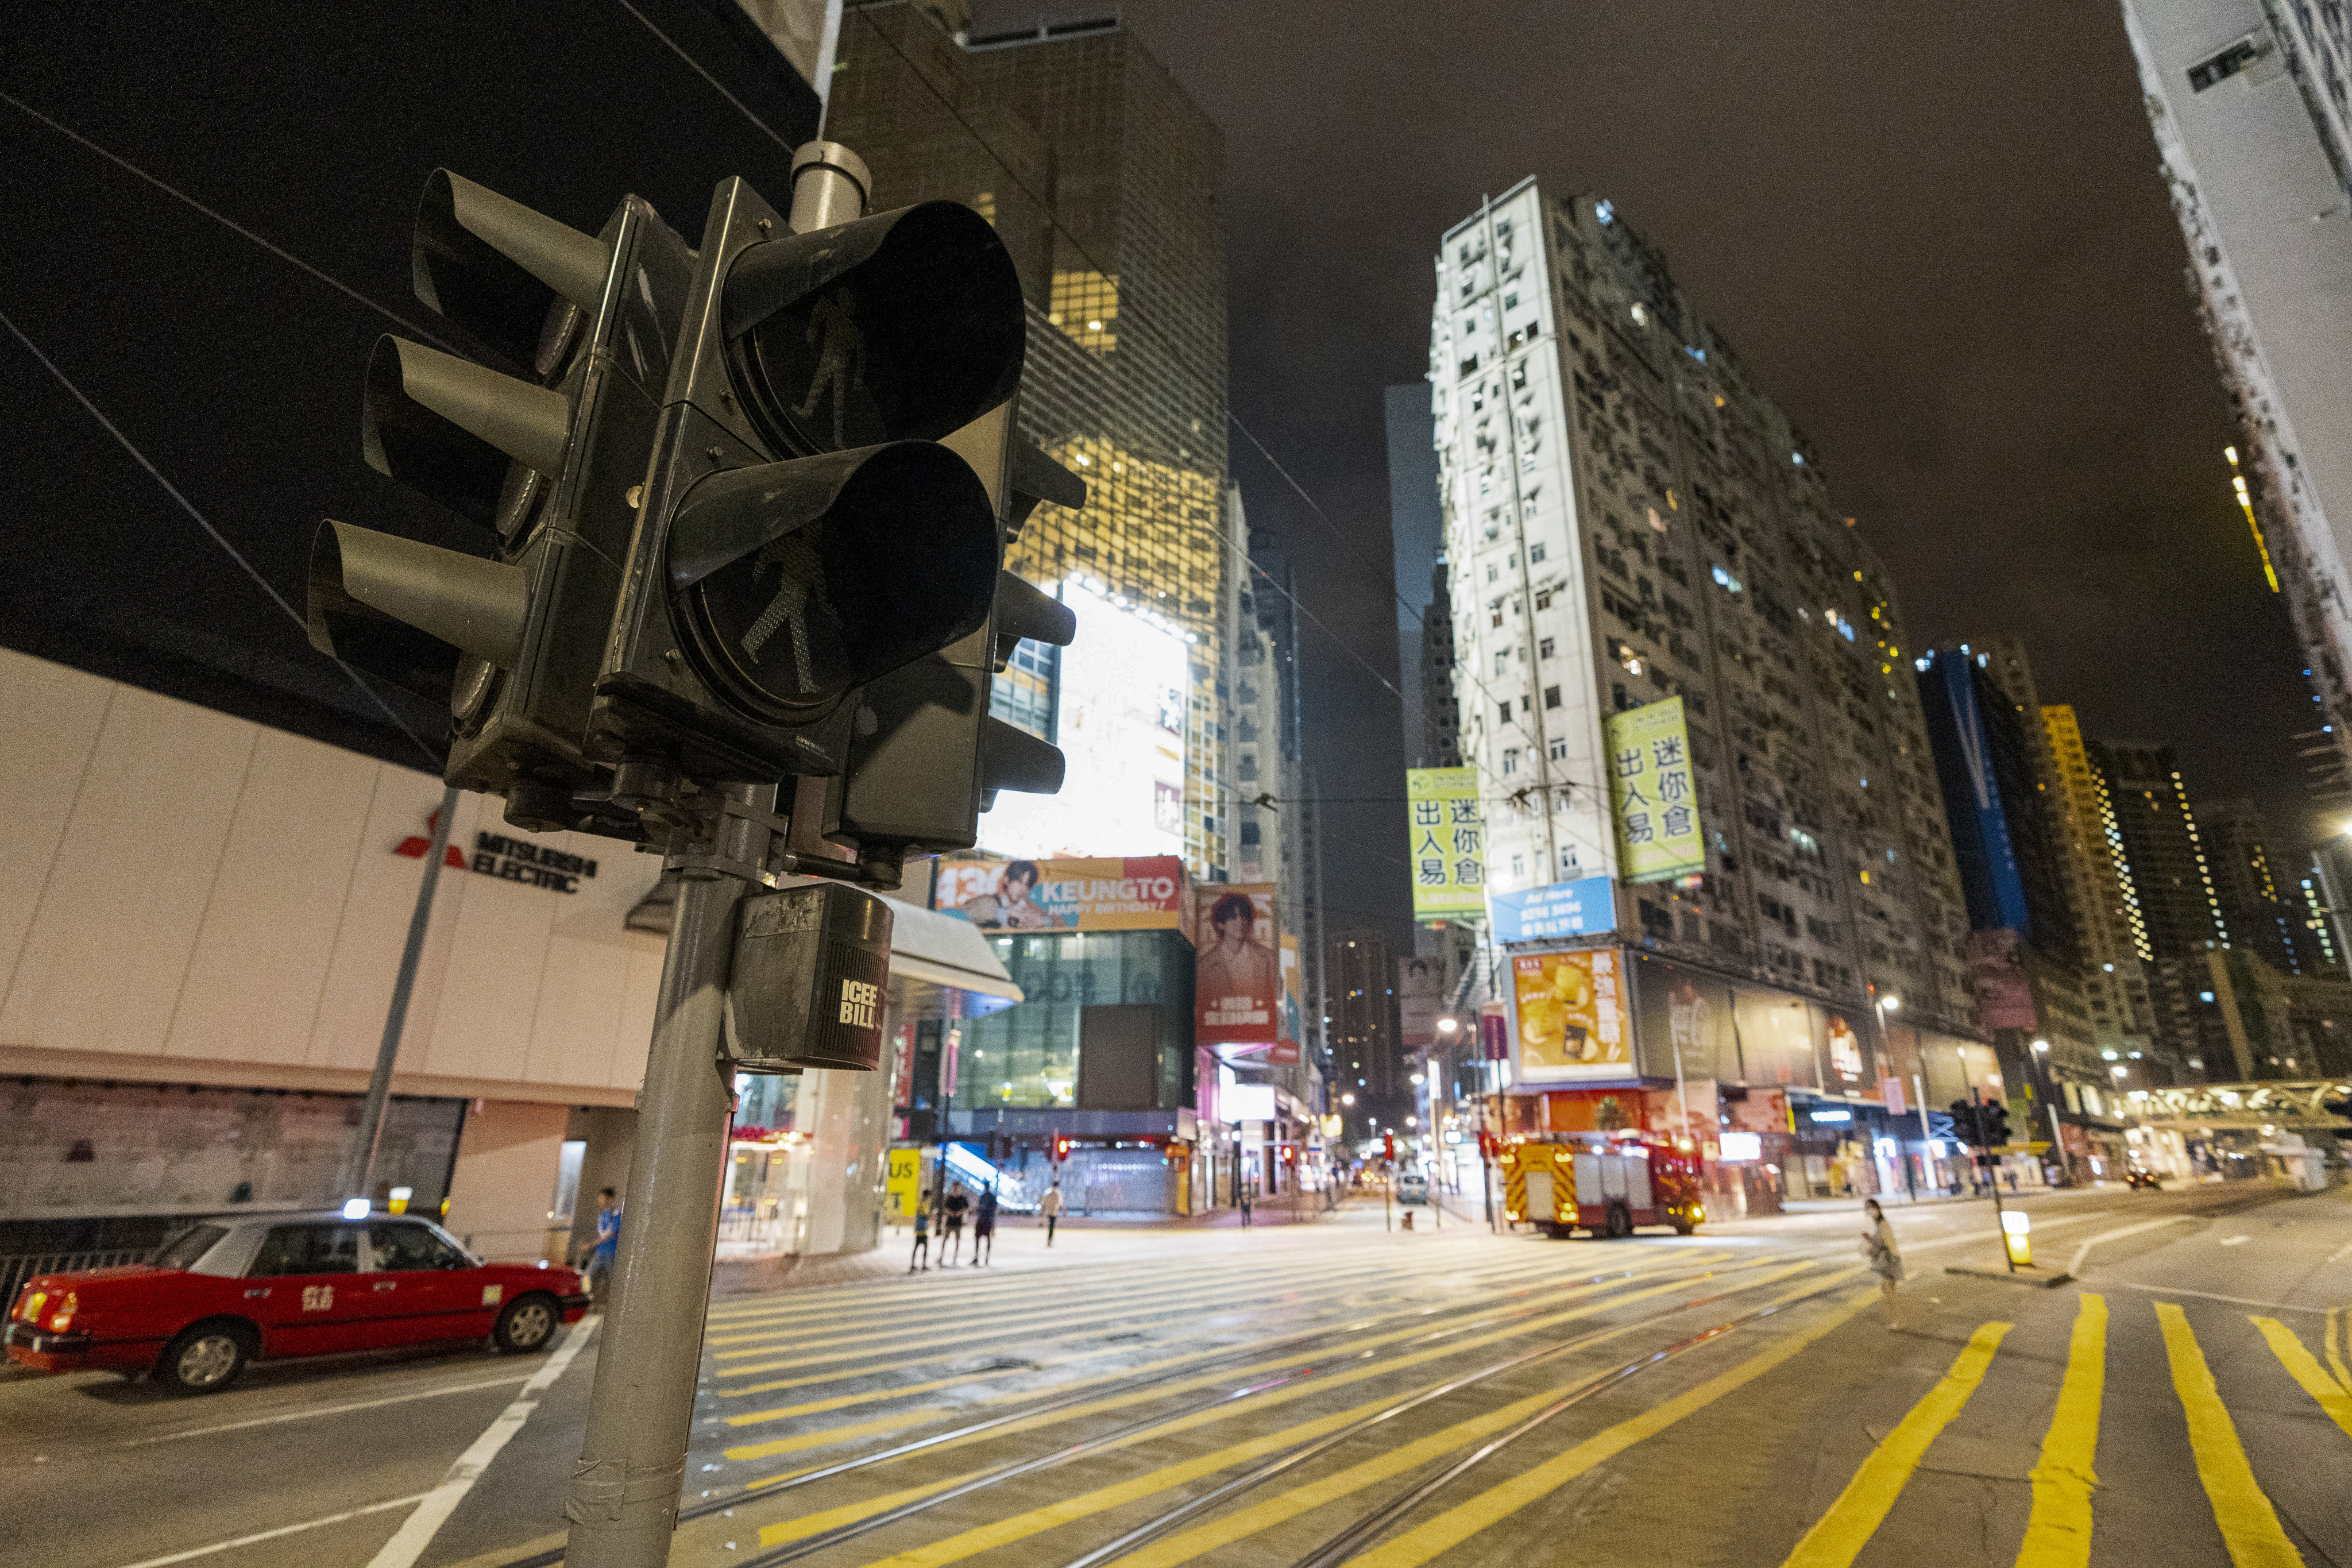 A power outage leaves traffic lights in the dark at Causeway Bay on Wednesday. Photo: Harvey Kong